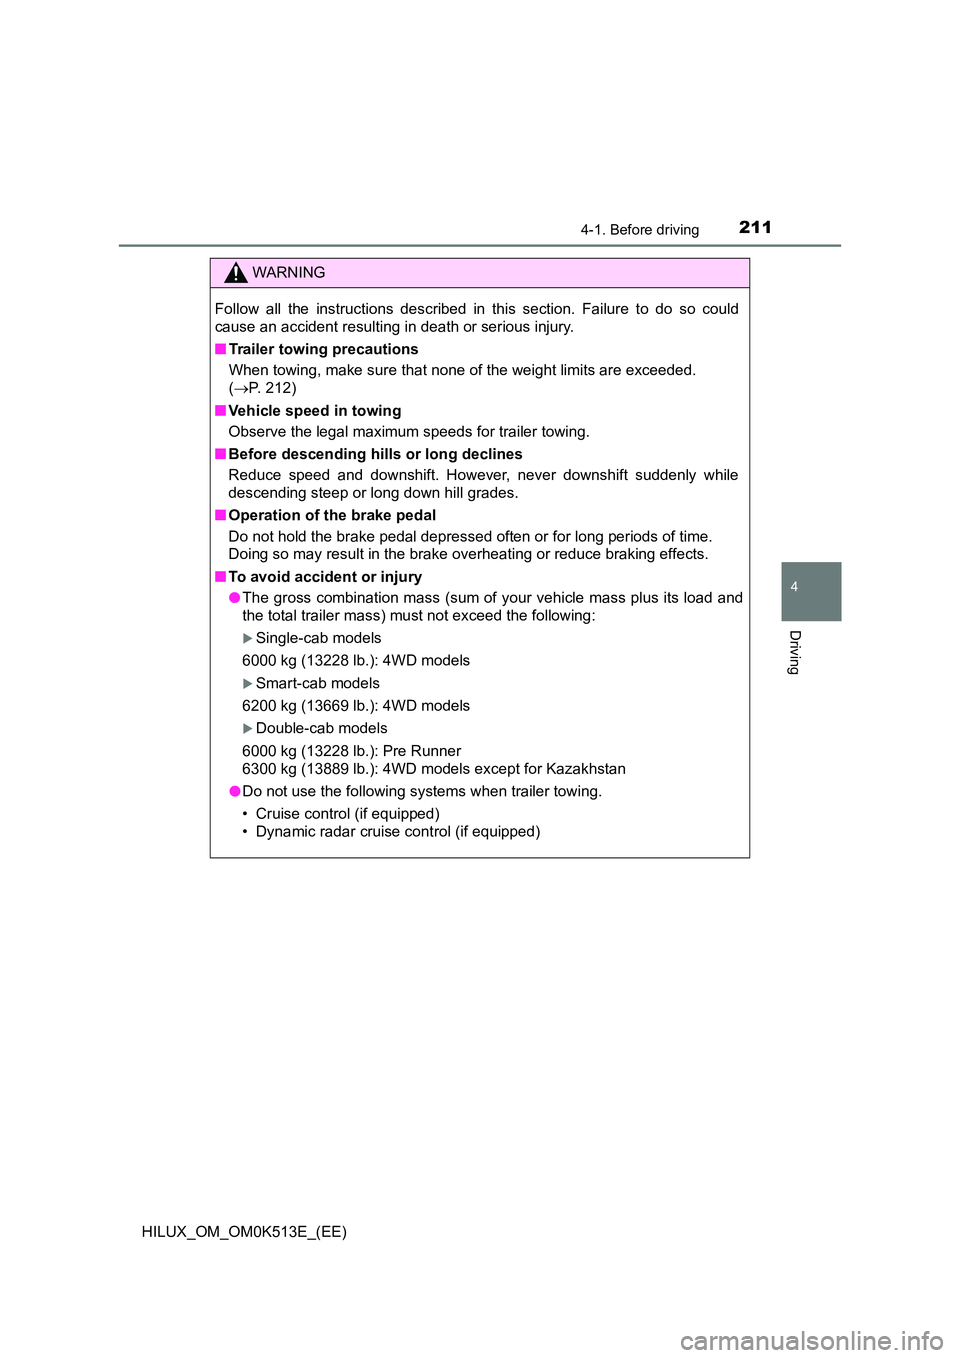 TOYOTA HILUX 2021  Owners Manual (in English) 2114-1. Before driving
4
Driving
HILUX_OM_OM0K513E_(EE)
WARNING
Follow all the instructions described in this section. Failure to do so could 
cause an accident resulting in death or serious injury. 
